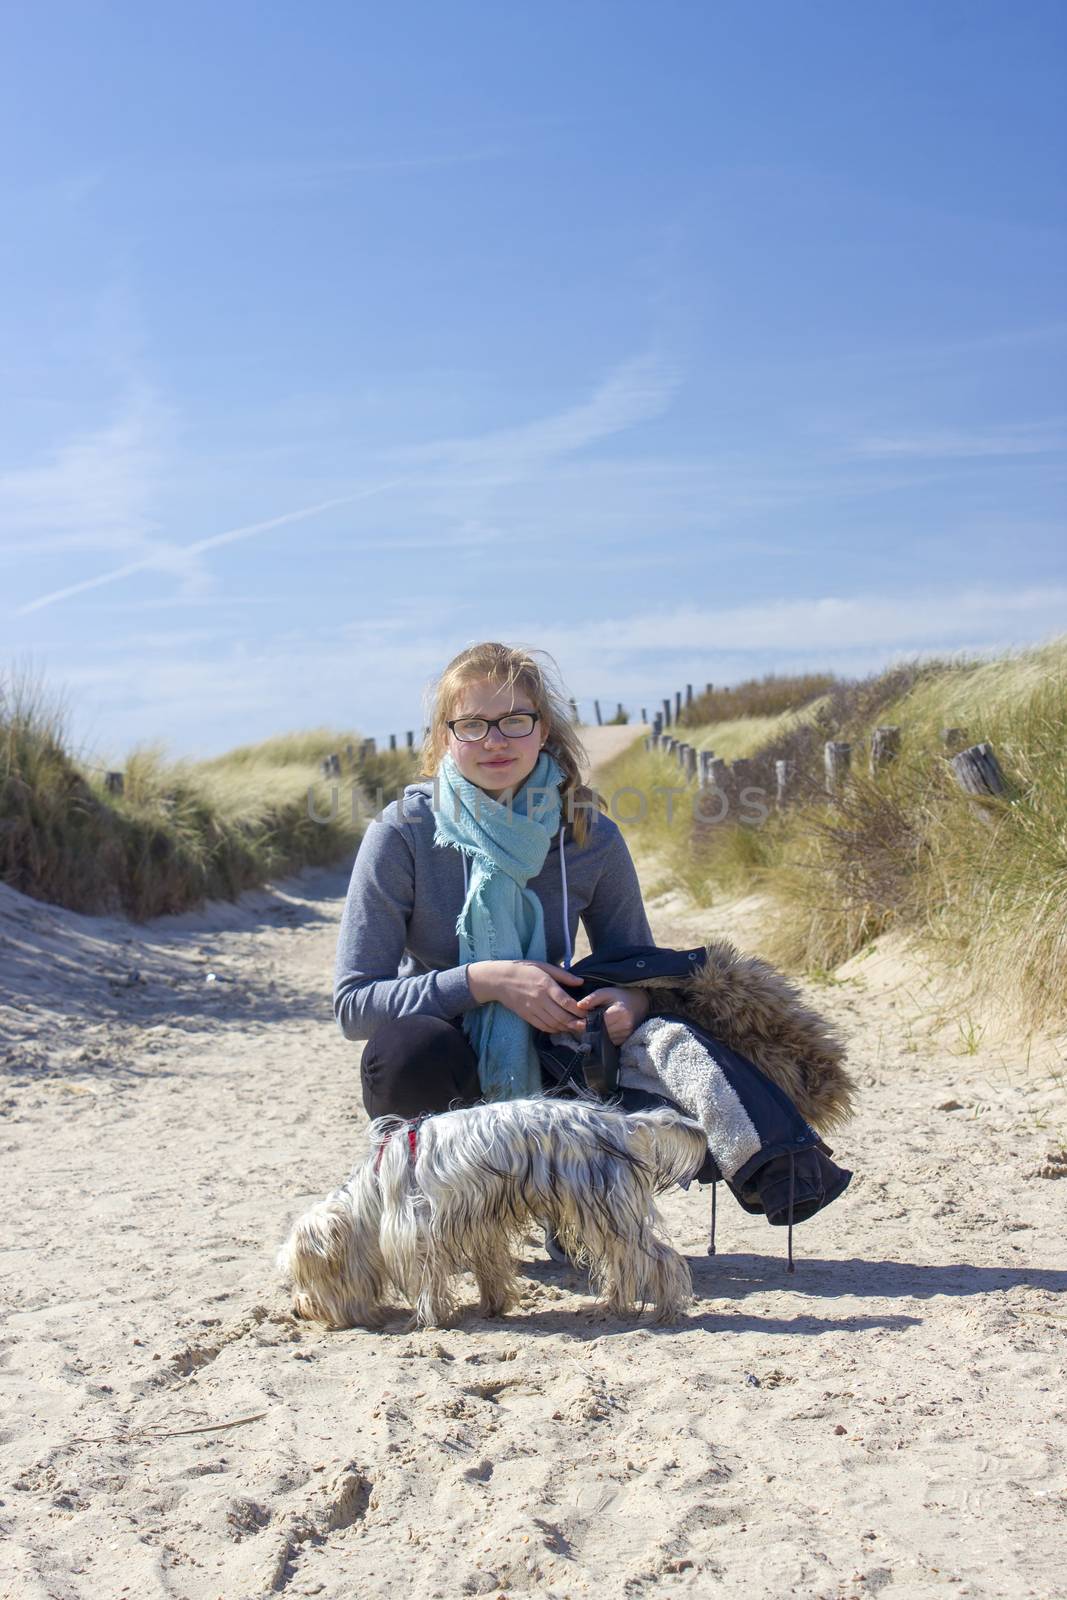 Walking with the dog in the dunes, Zoutelande, Netherlands by miradrozdowski